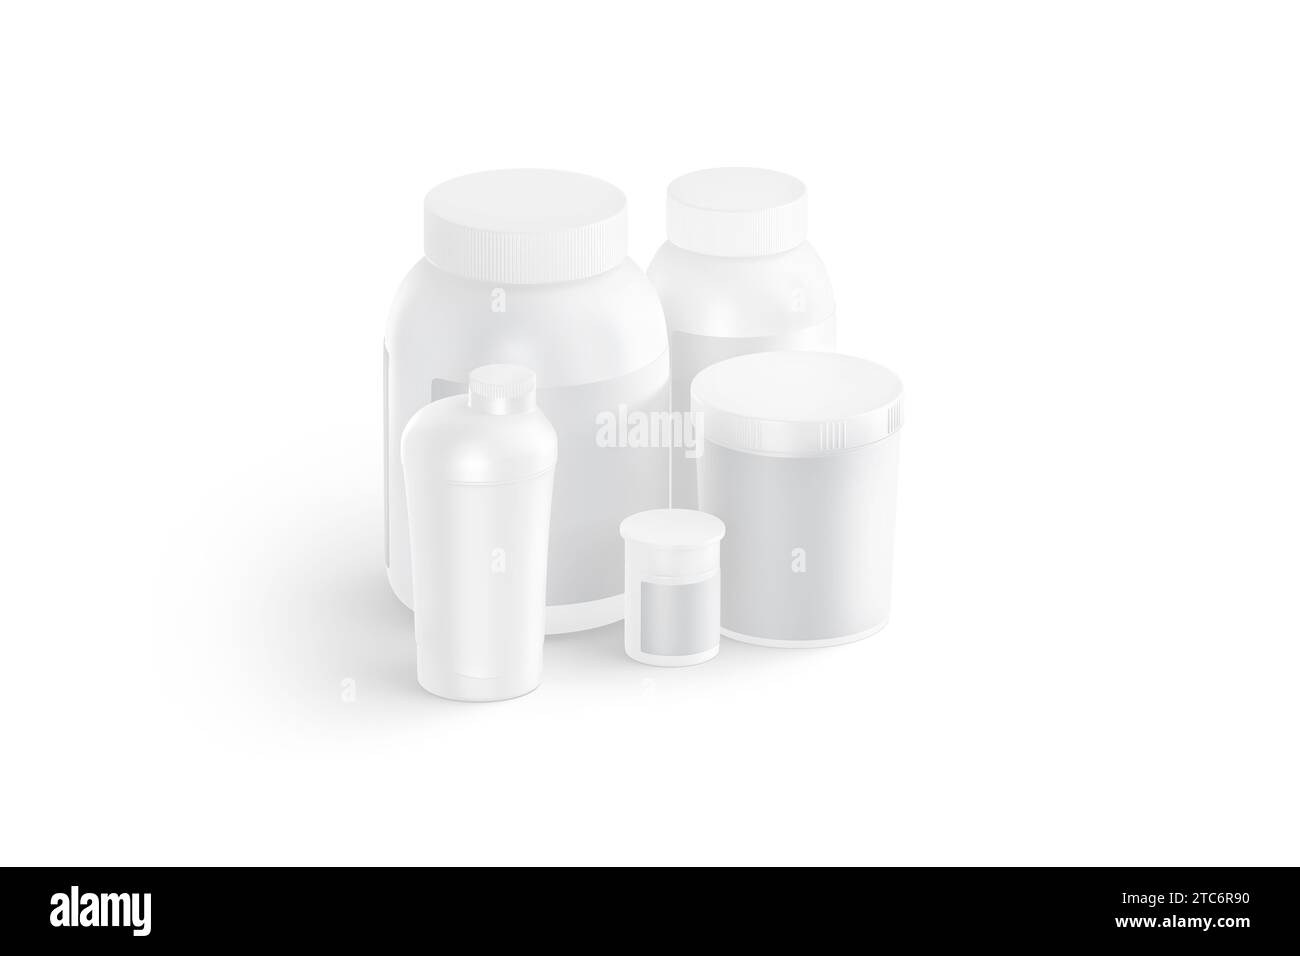 https://c8.alamy.com/comp/2TC6R90/blank-white-big-and-small-protein-cans-mockup-side-view-3d-rendering-empty-nutrient-bottle-and-box-for-sport-whey-mock-up-isolated-clear-medicati-2TC6R90.jpg